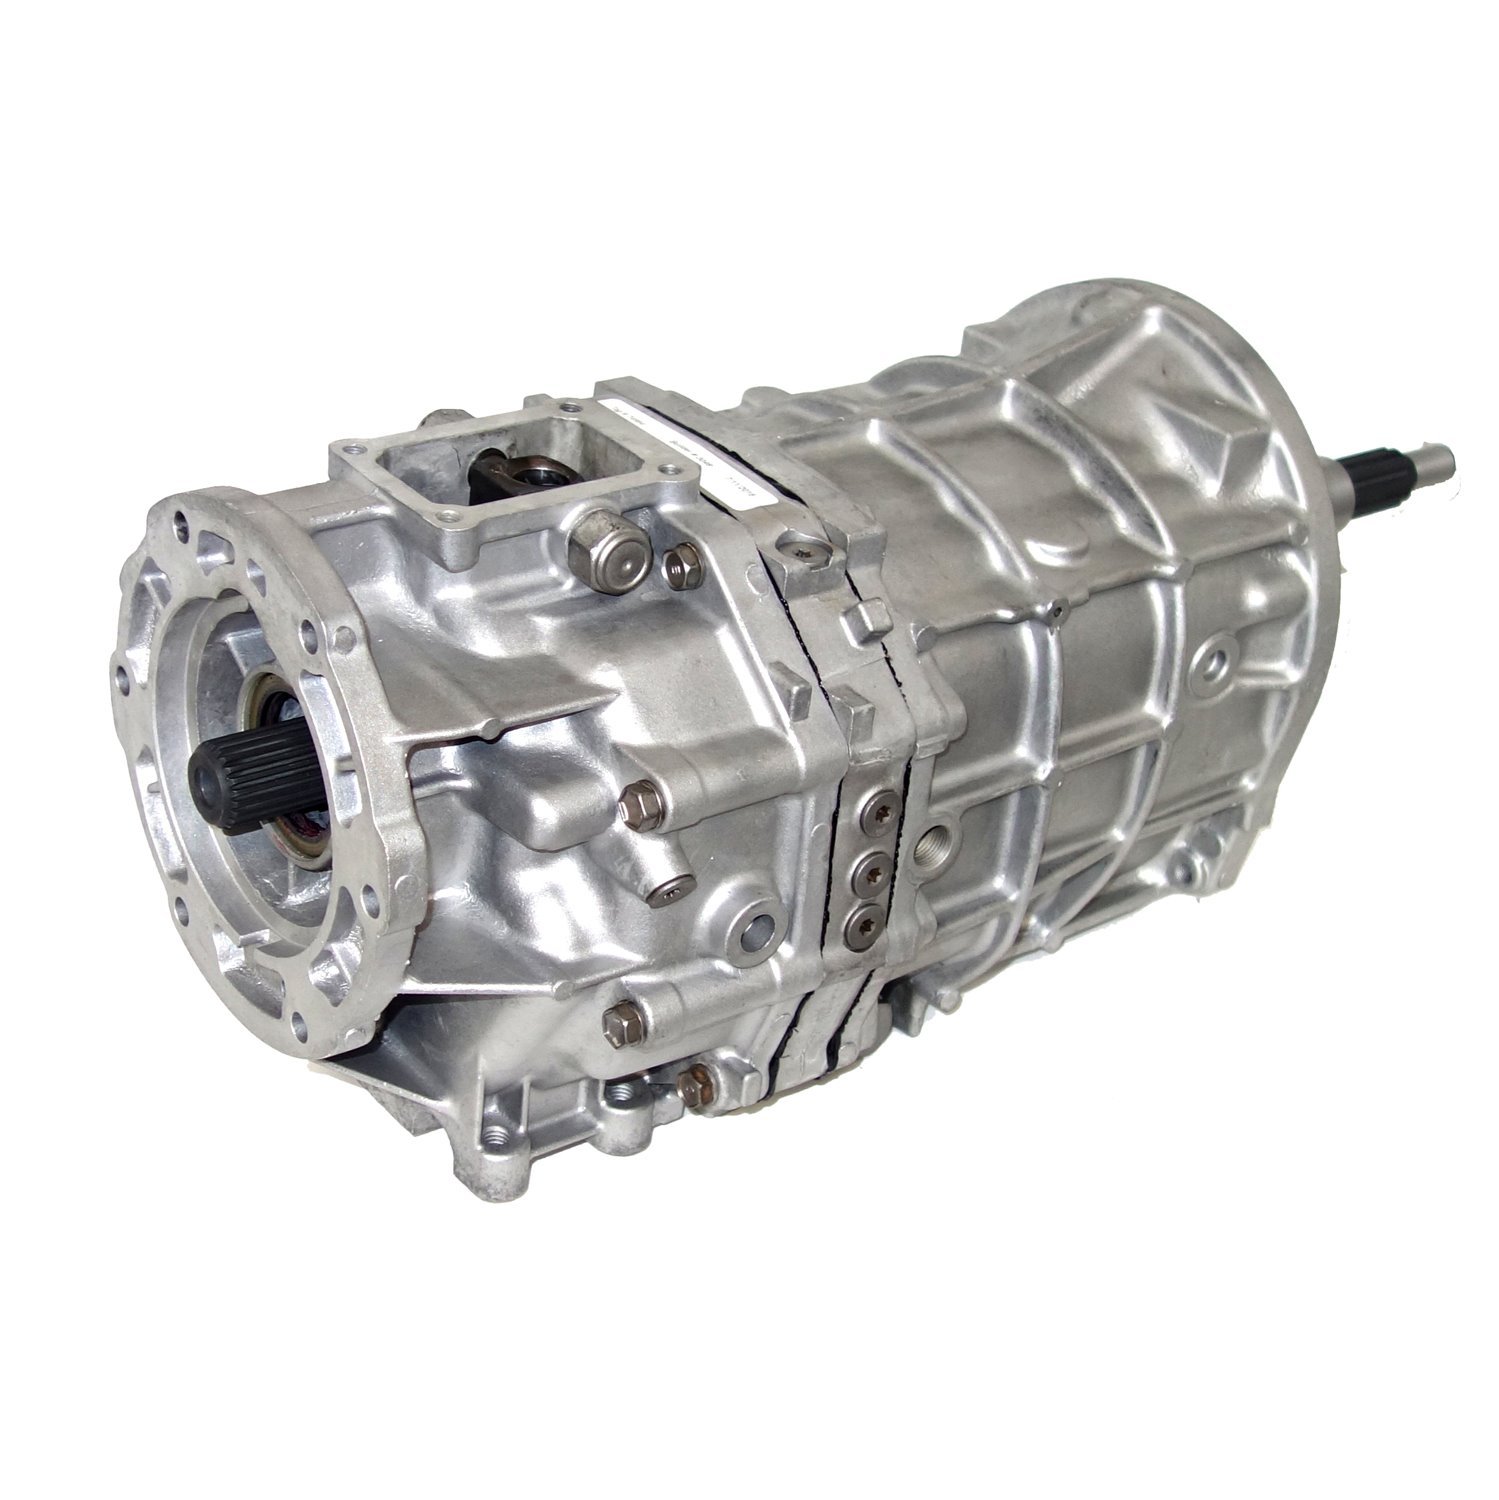 Remanufactured AX15 Manual Transmission for Jeep 89-91 Wrangler,